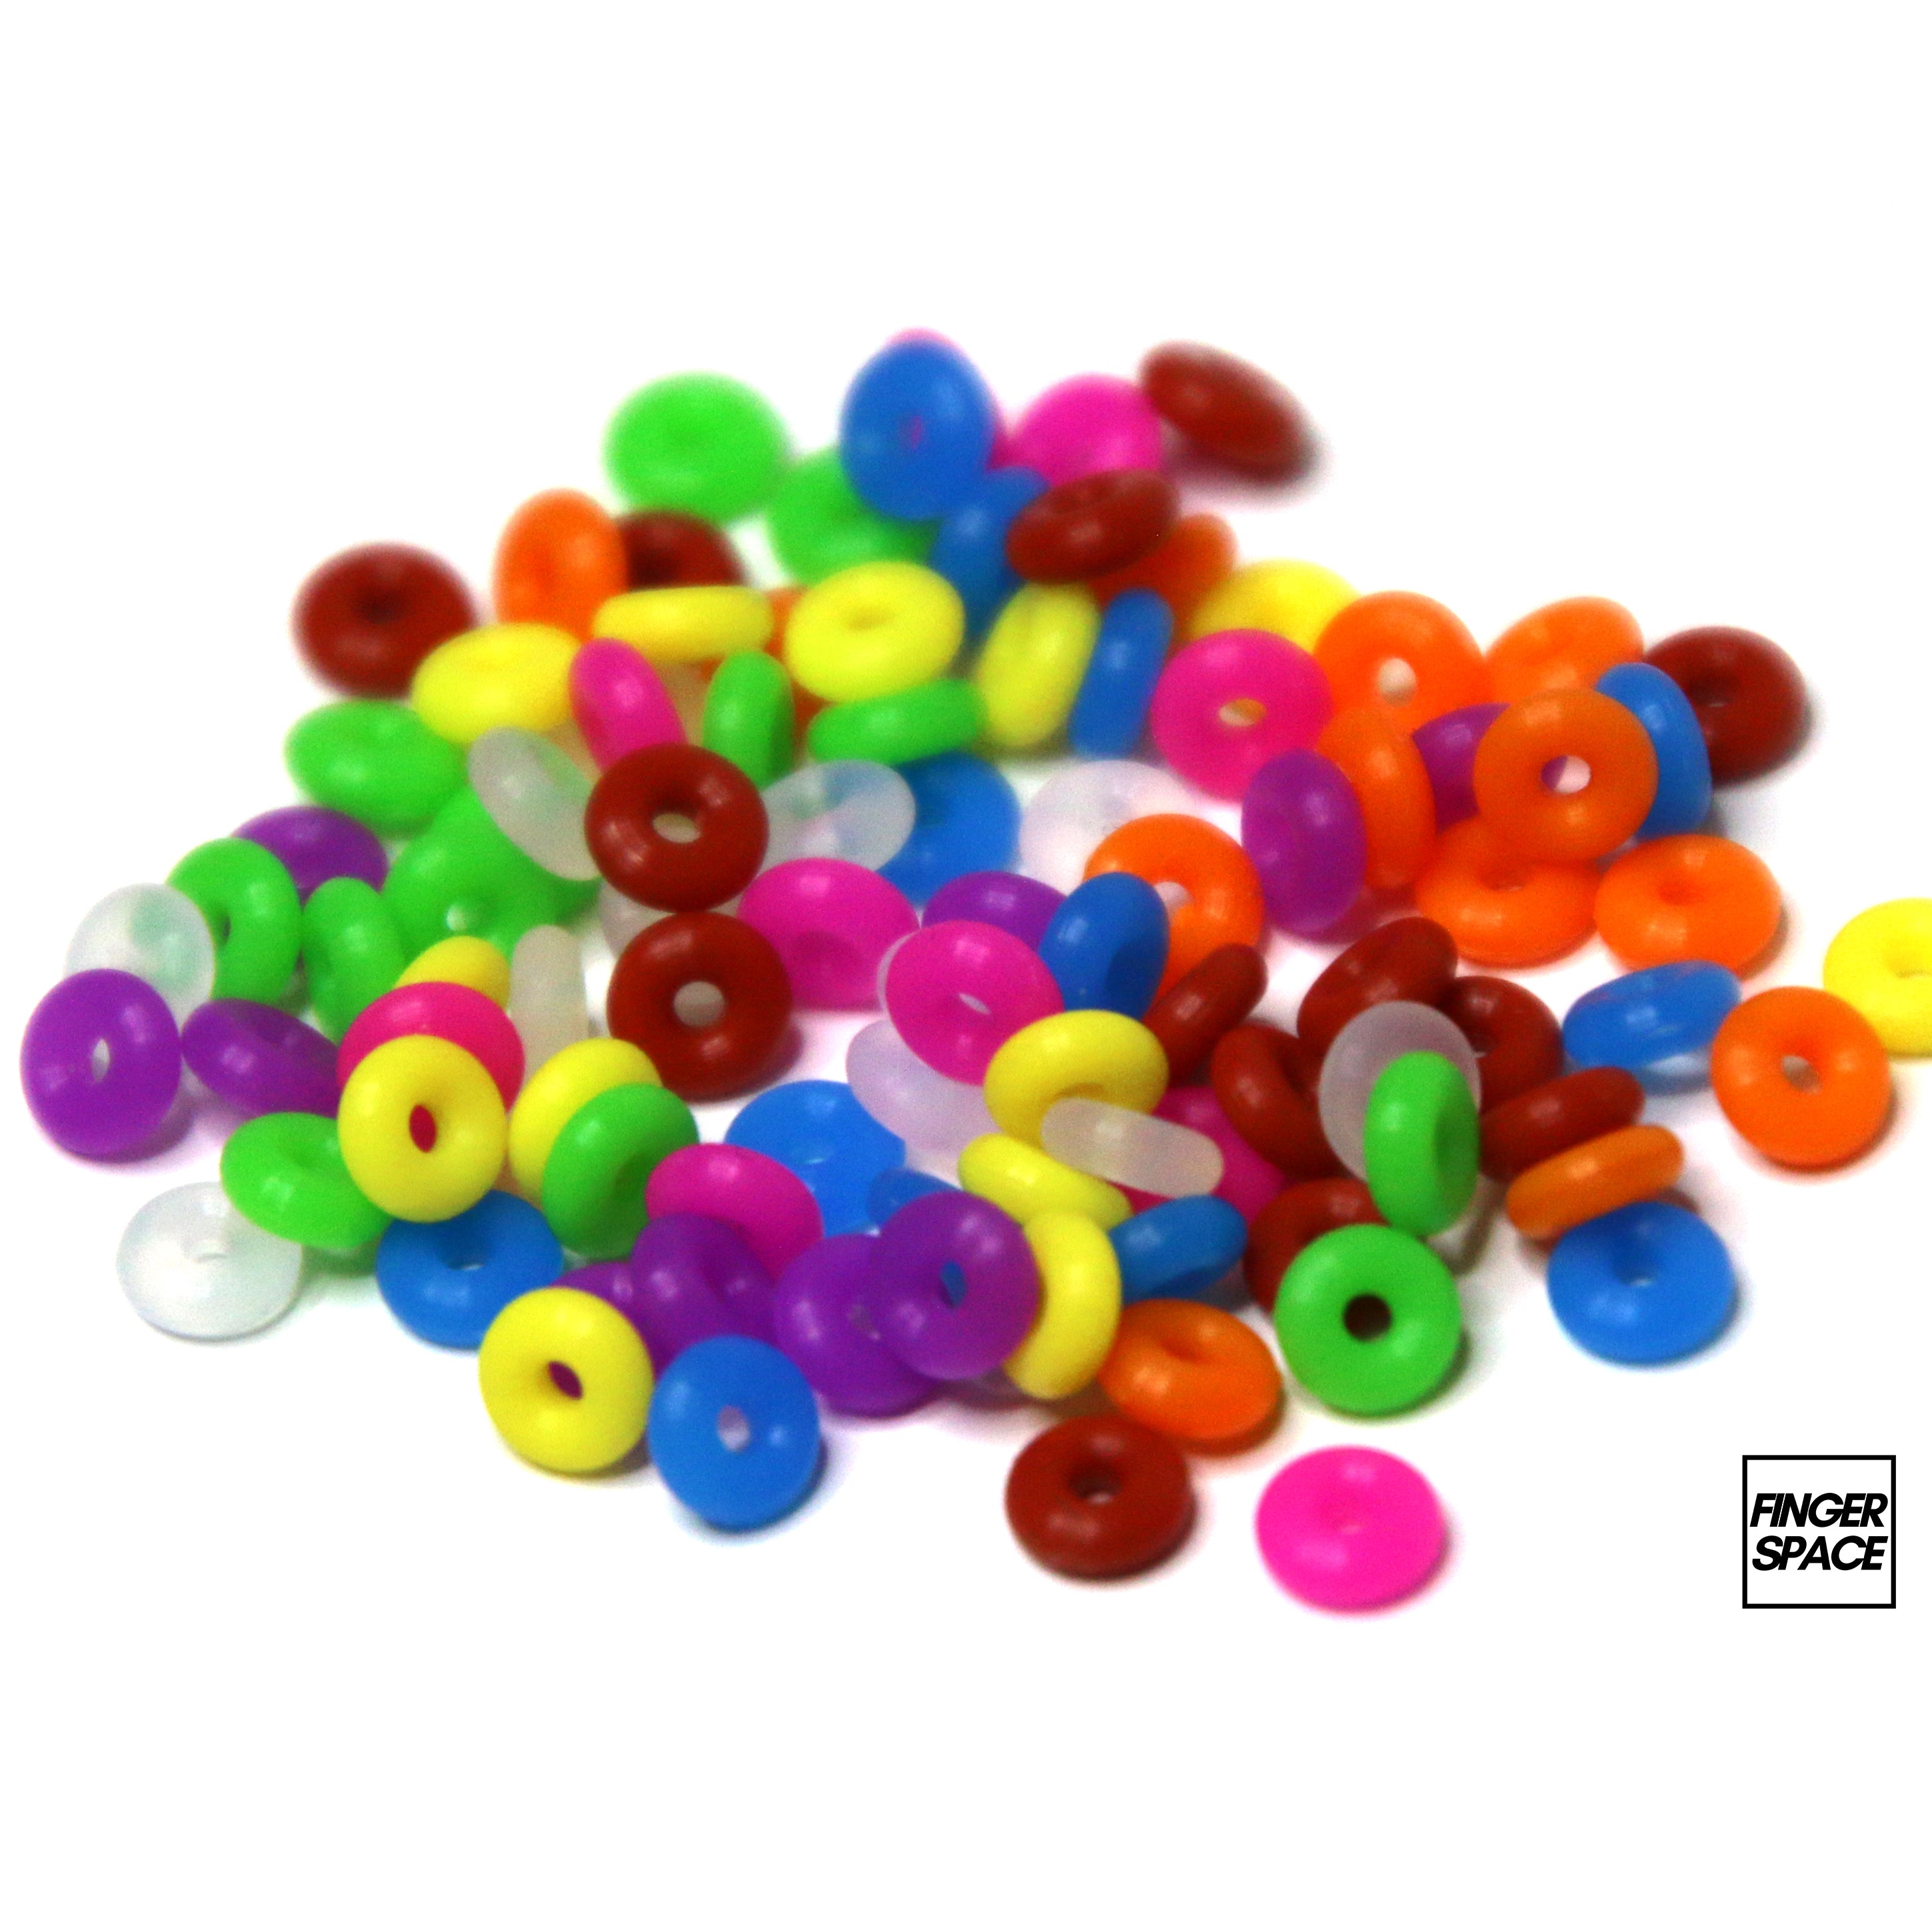 12-Pack of Mixed Color Silicone O-Ring Tuning